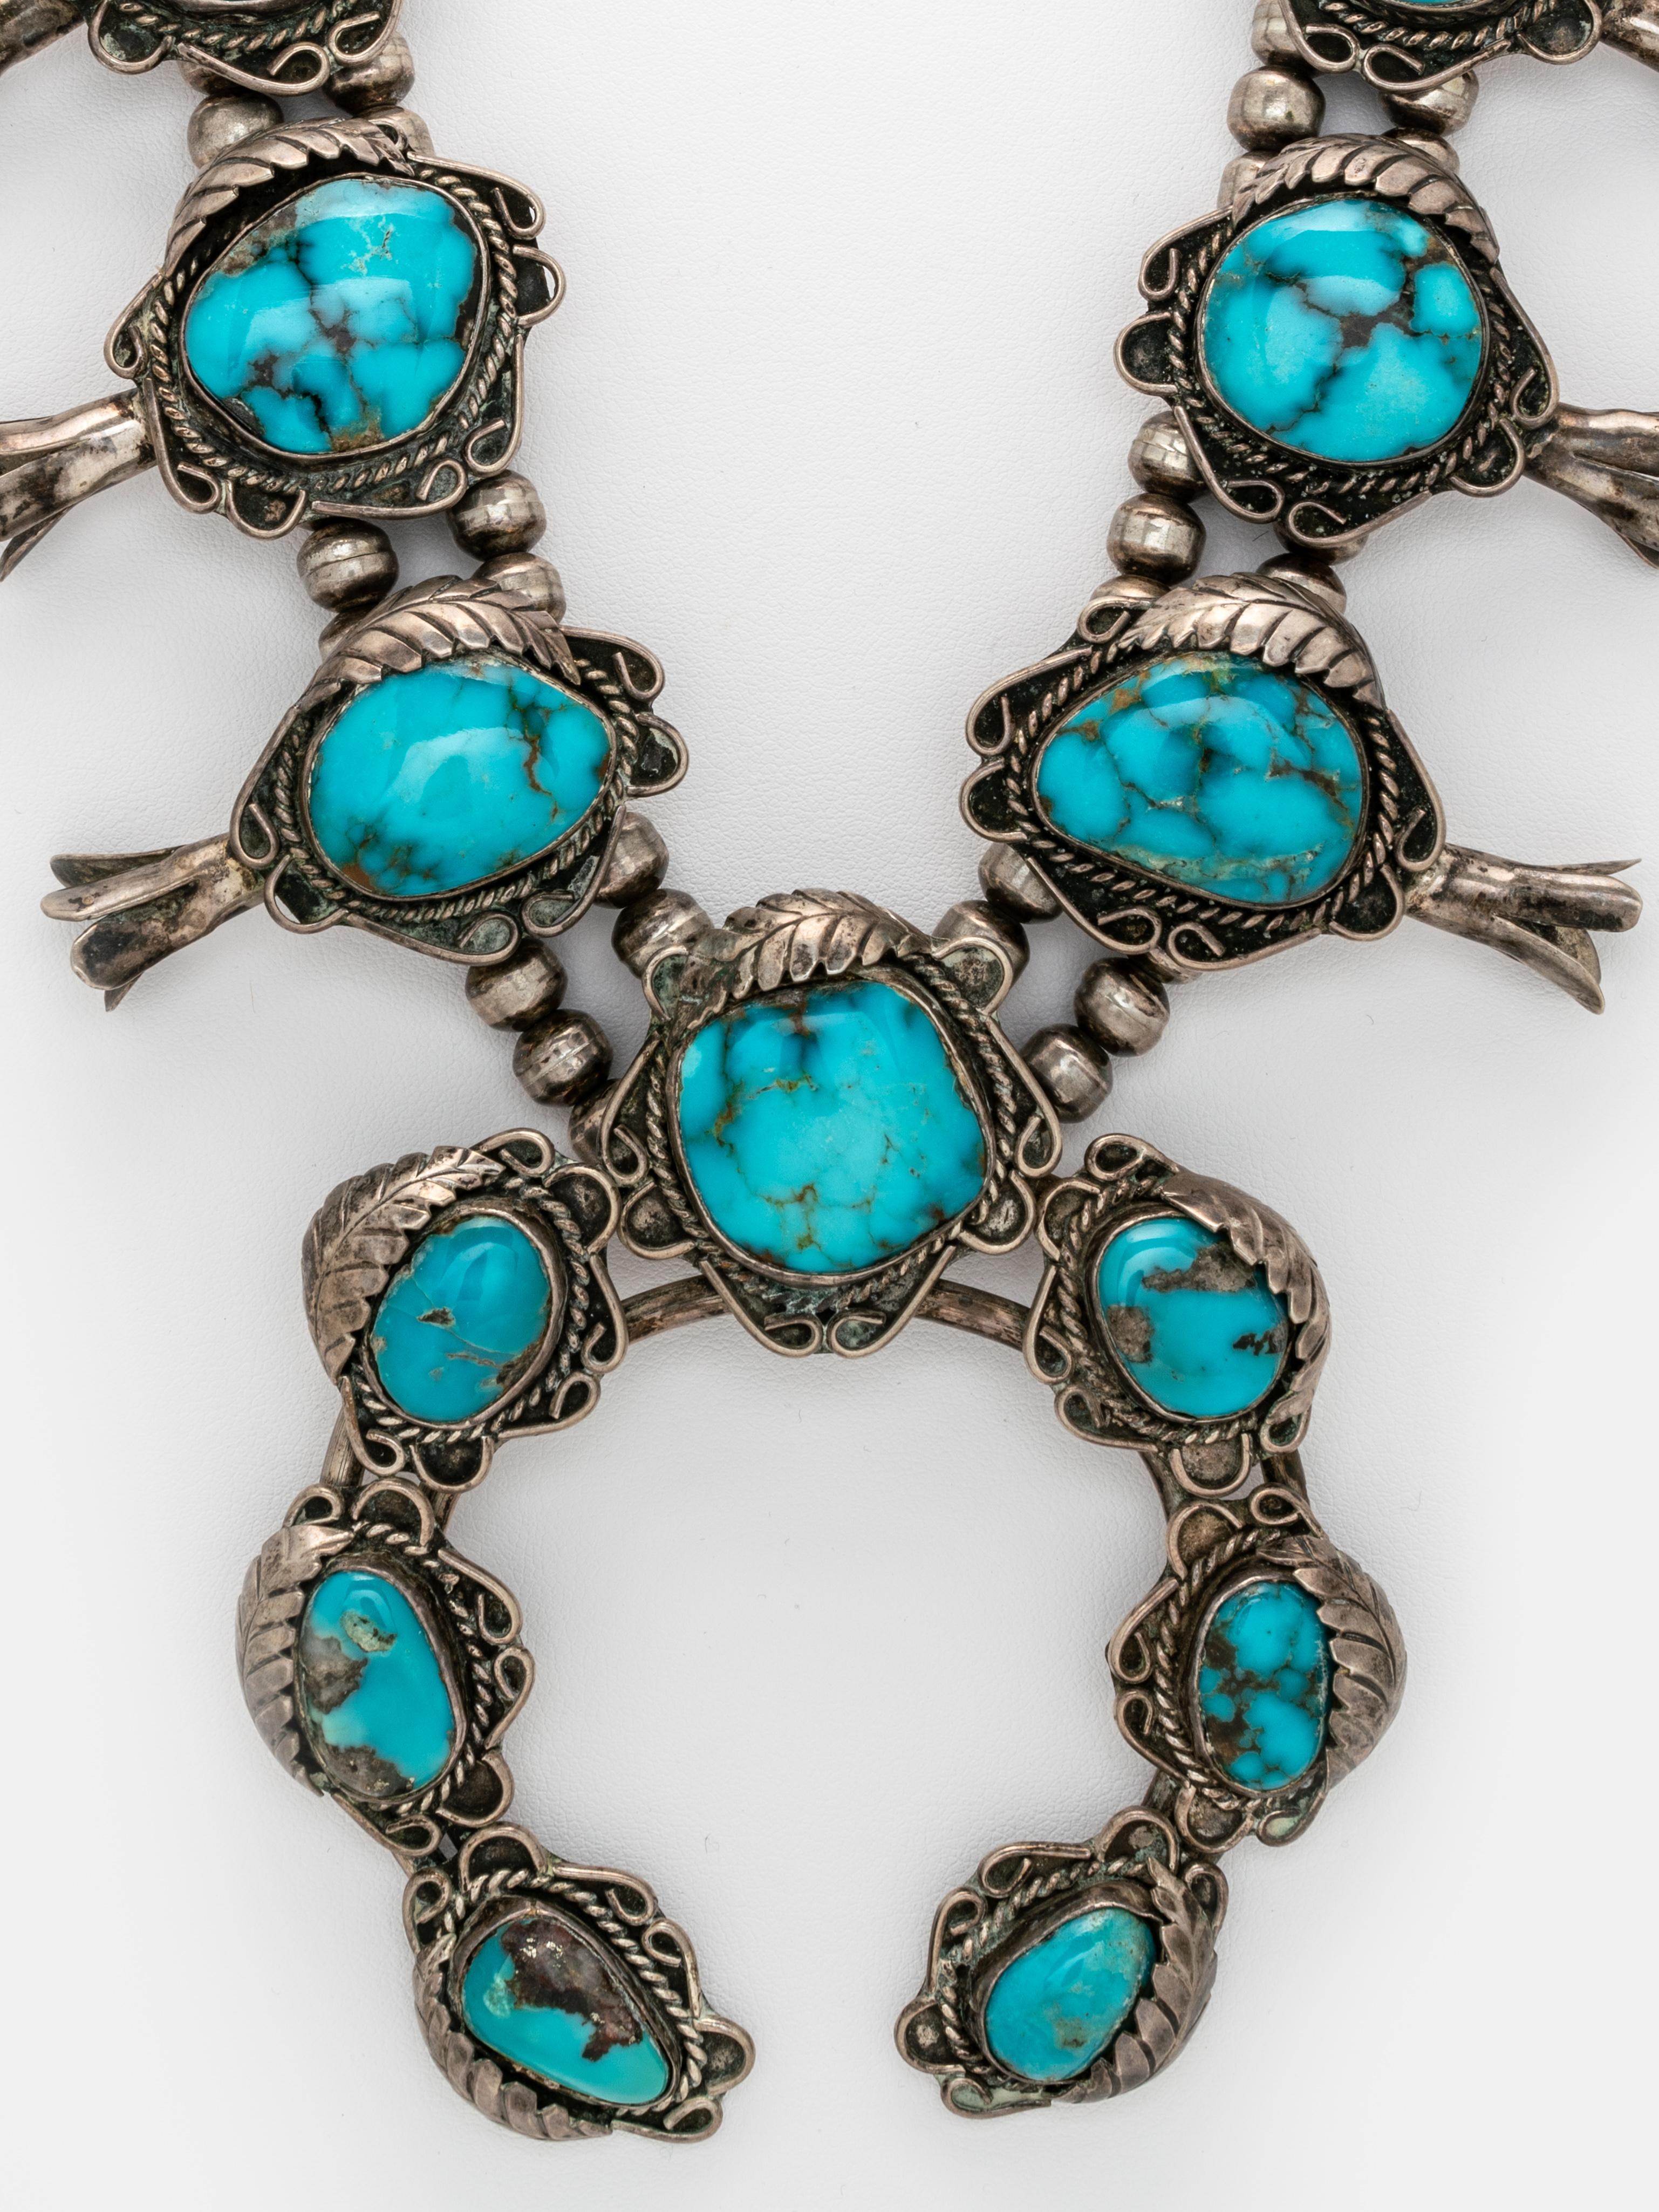 Amazing Vintage Navajo Silver and Kingman Turquoise Squash Blossom Necklace c.1970s
209 Grams
Length: 66 cm